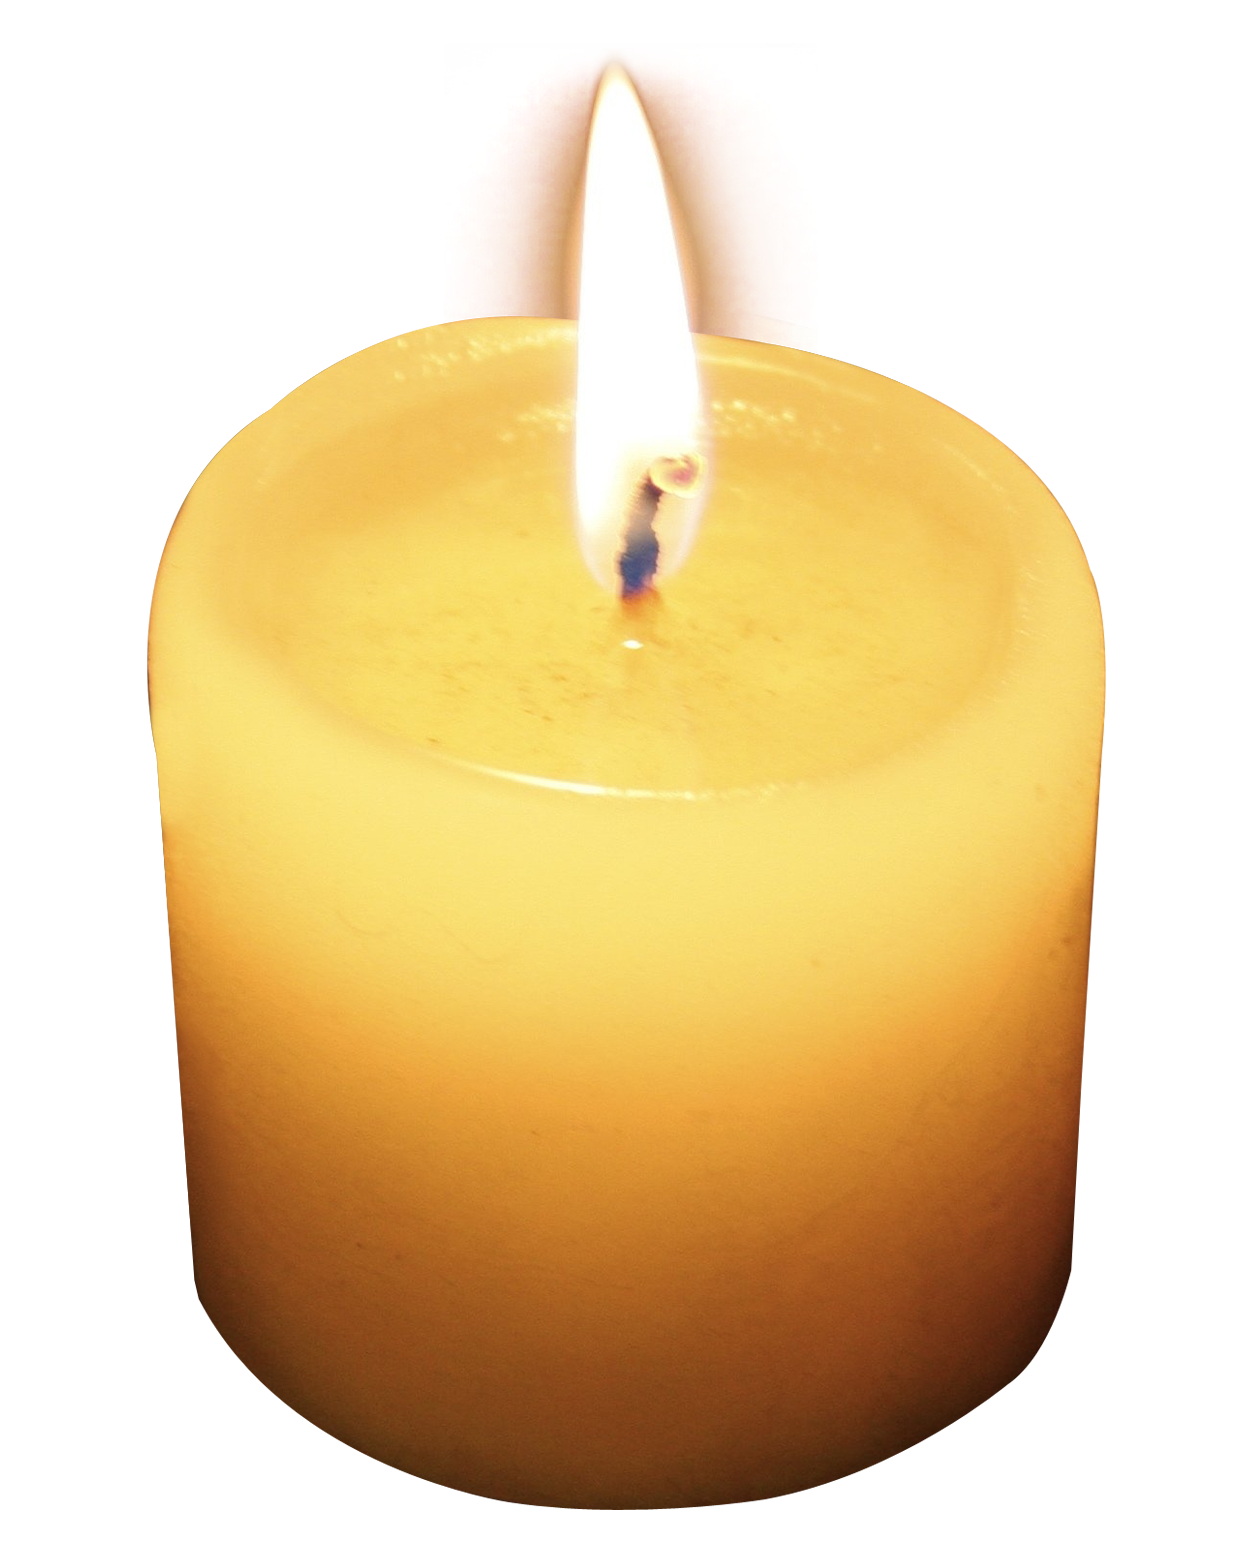 A Close Up Of A Candle